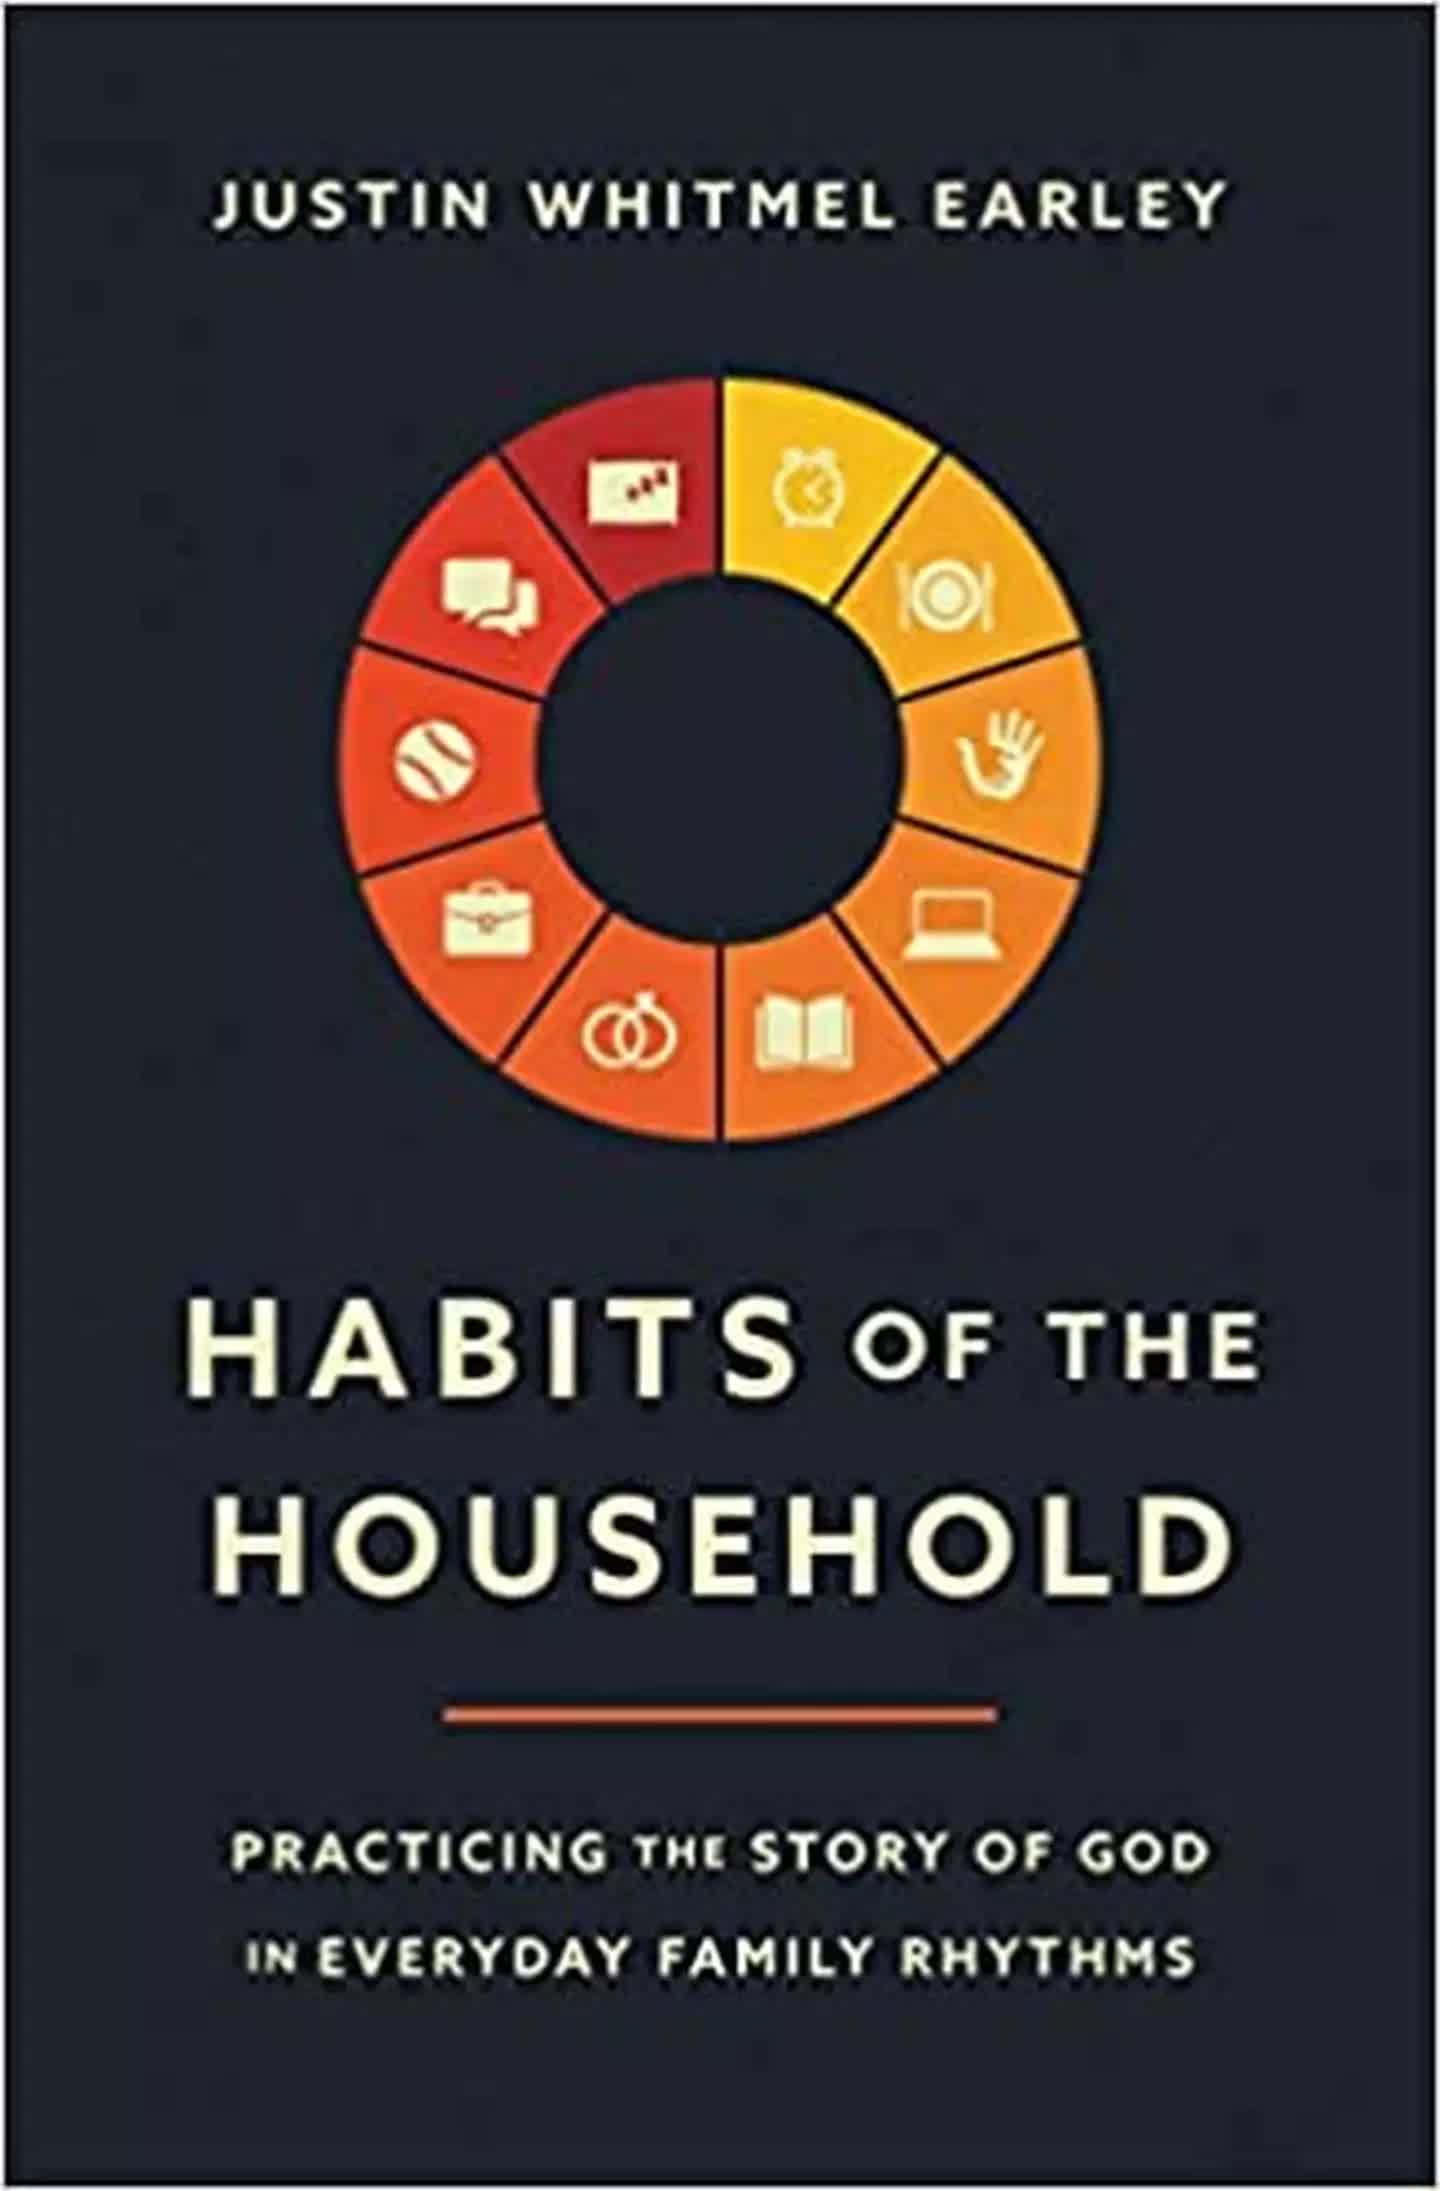 habits of the household book cover by Justin Whitmel Earley